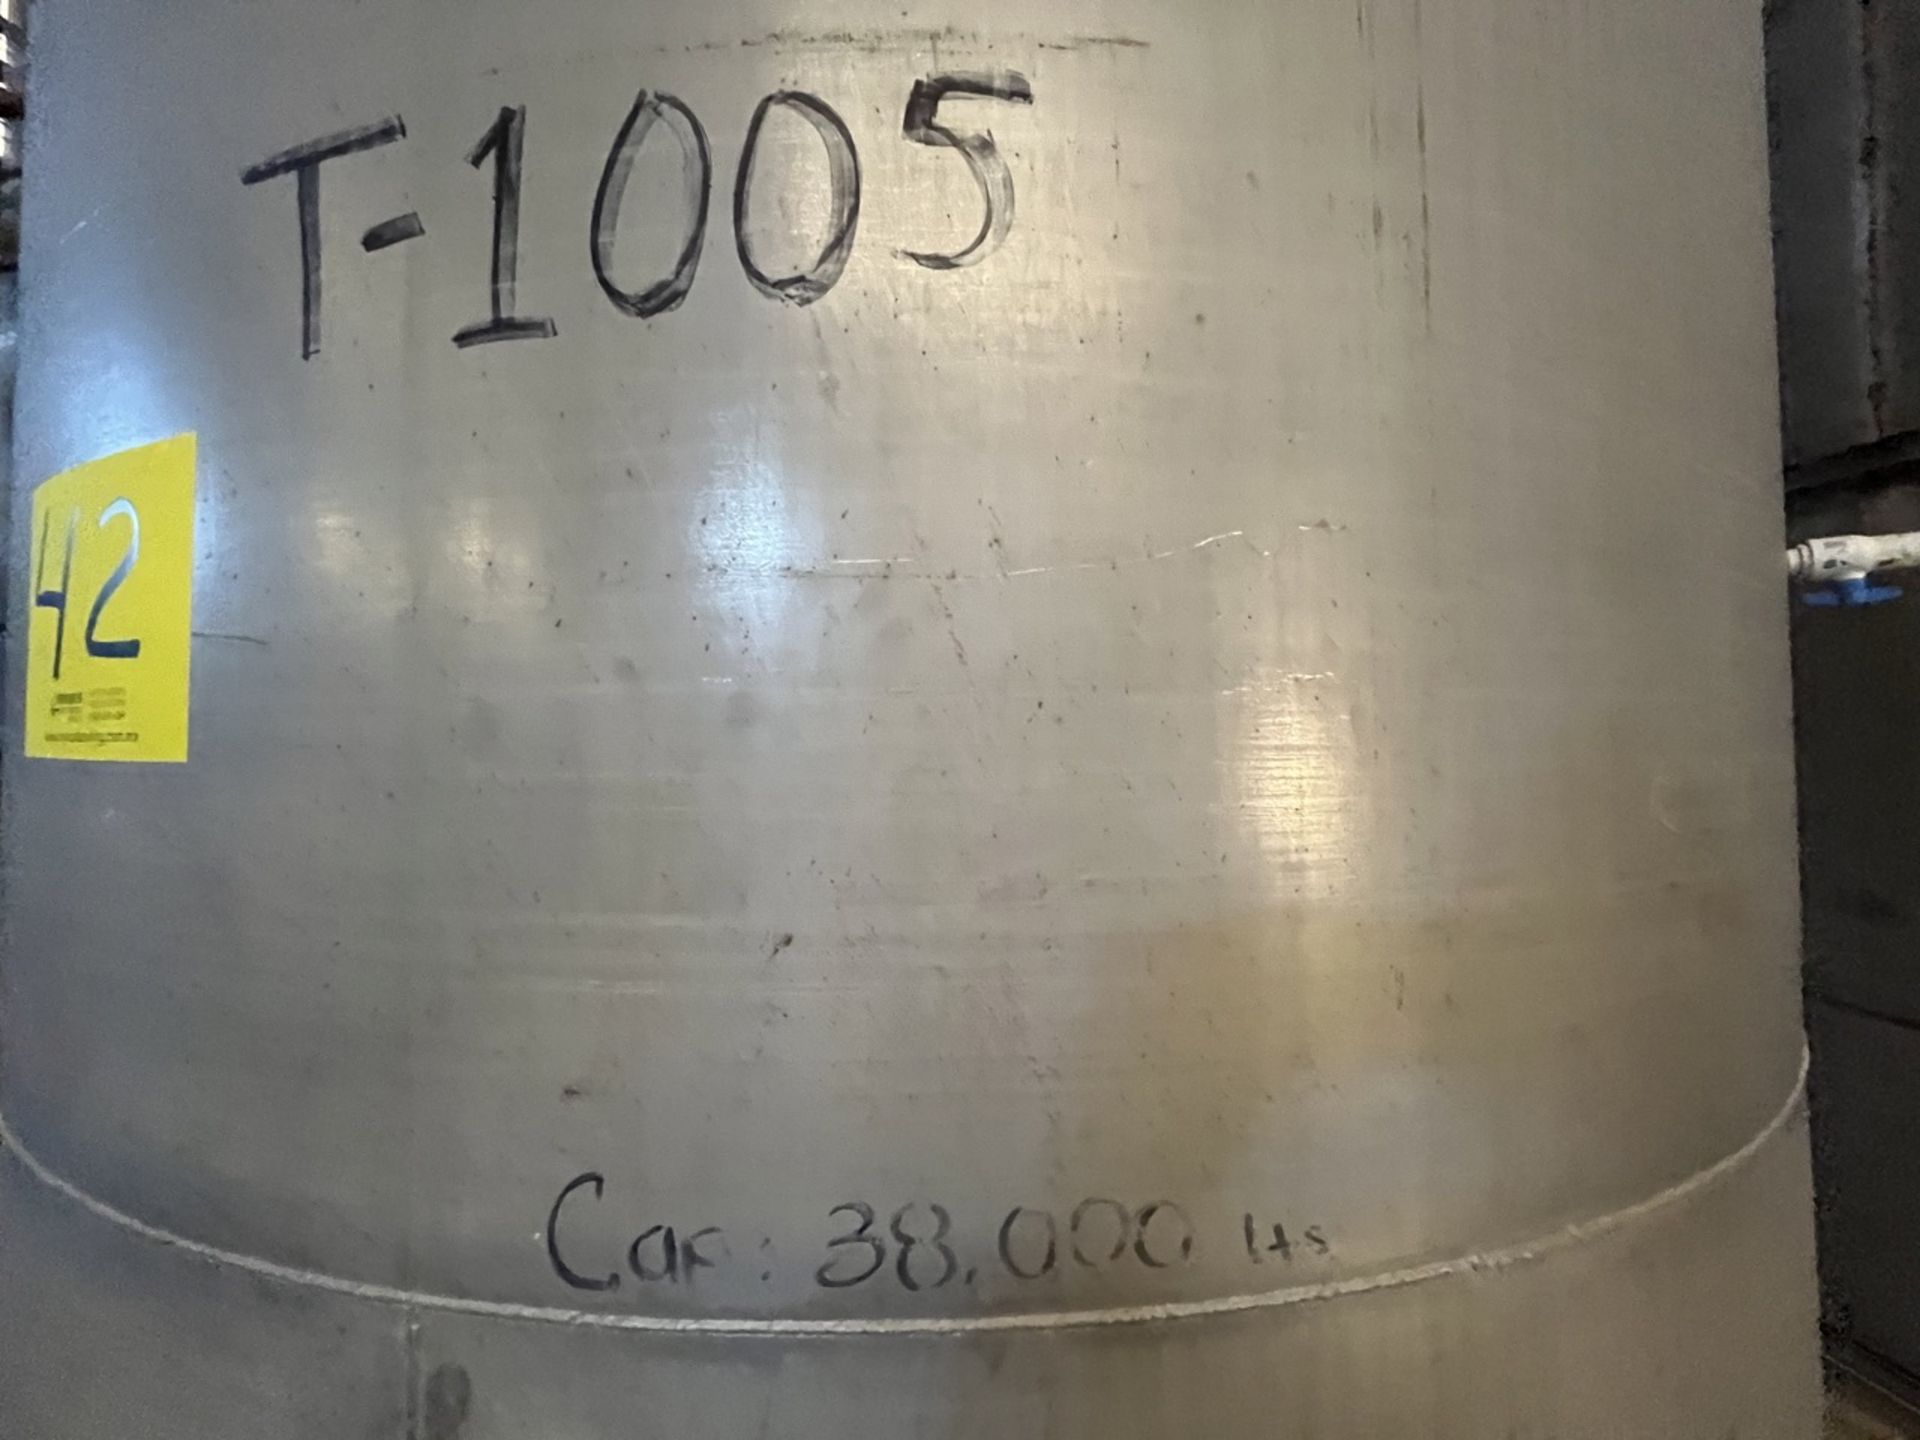 Stainless steel storage tank with a capacity of 38,000 liters, measuring approximately 2.80 meters - Image 8 of 9